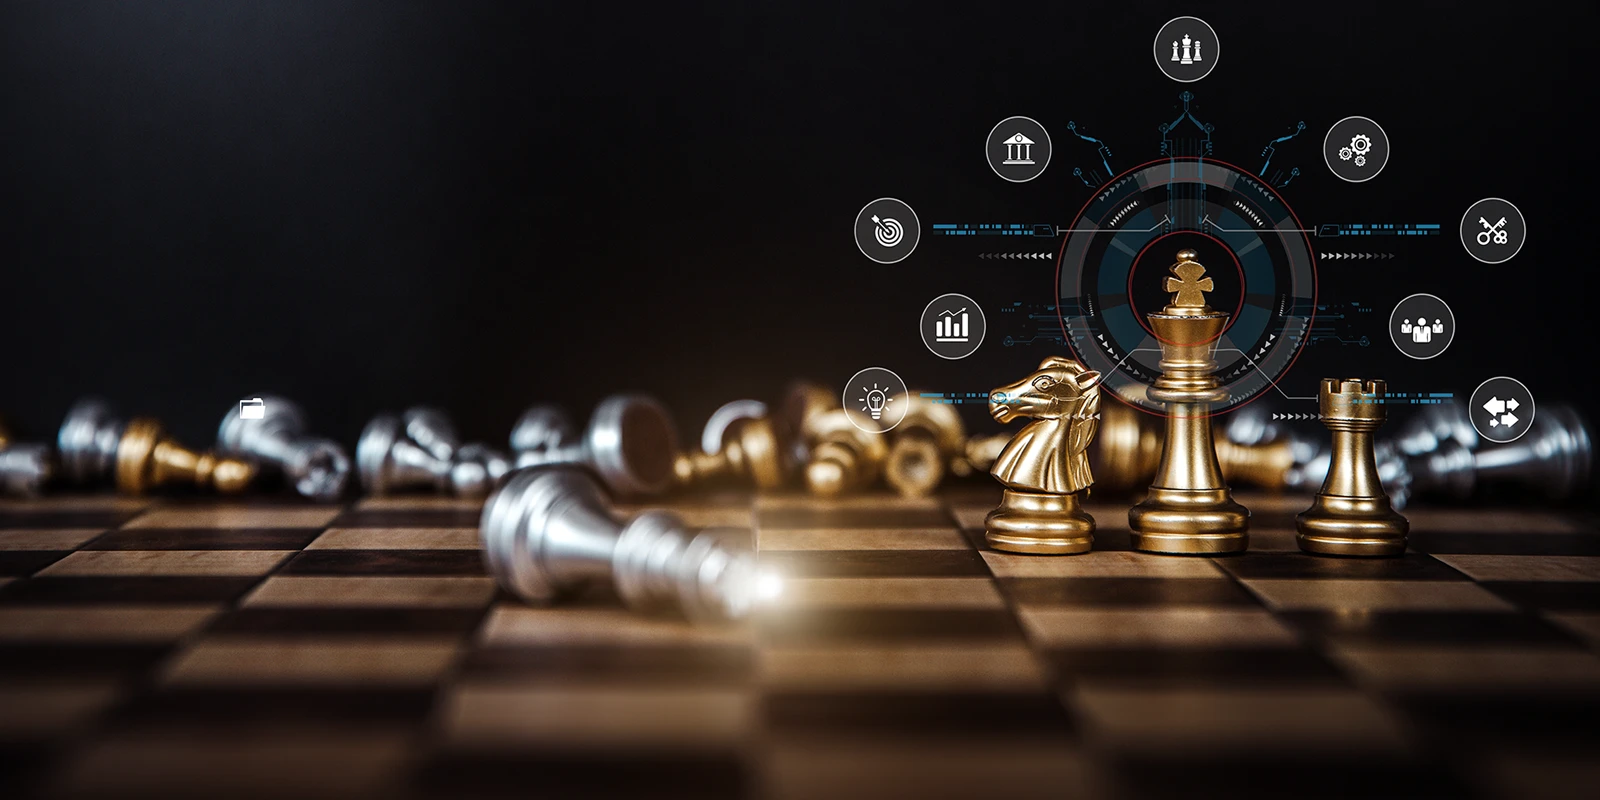 Gold and silver chess pieces on a chess board with infographic icons coming off the king